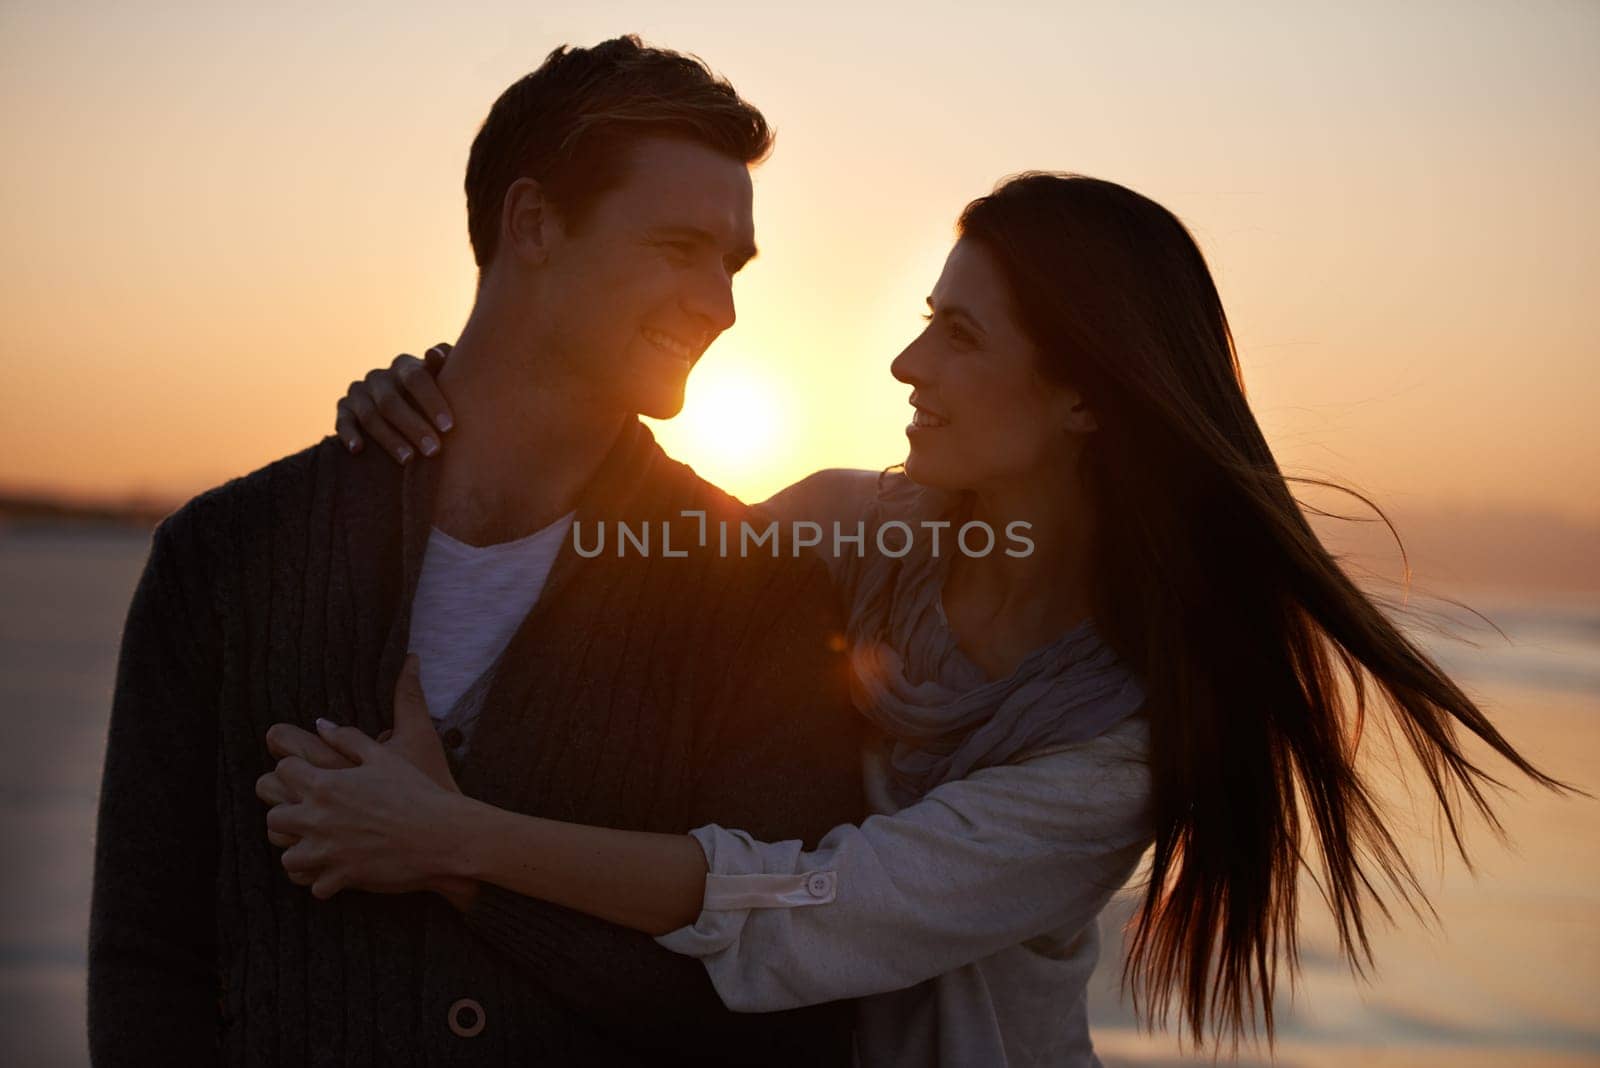 Couple hug, sunset on beach and travel for bonding, romance outdoor with love and trust. Happiness, support and loyalty with people in relationship, sunshine and adventure together with smile.